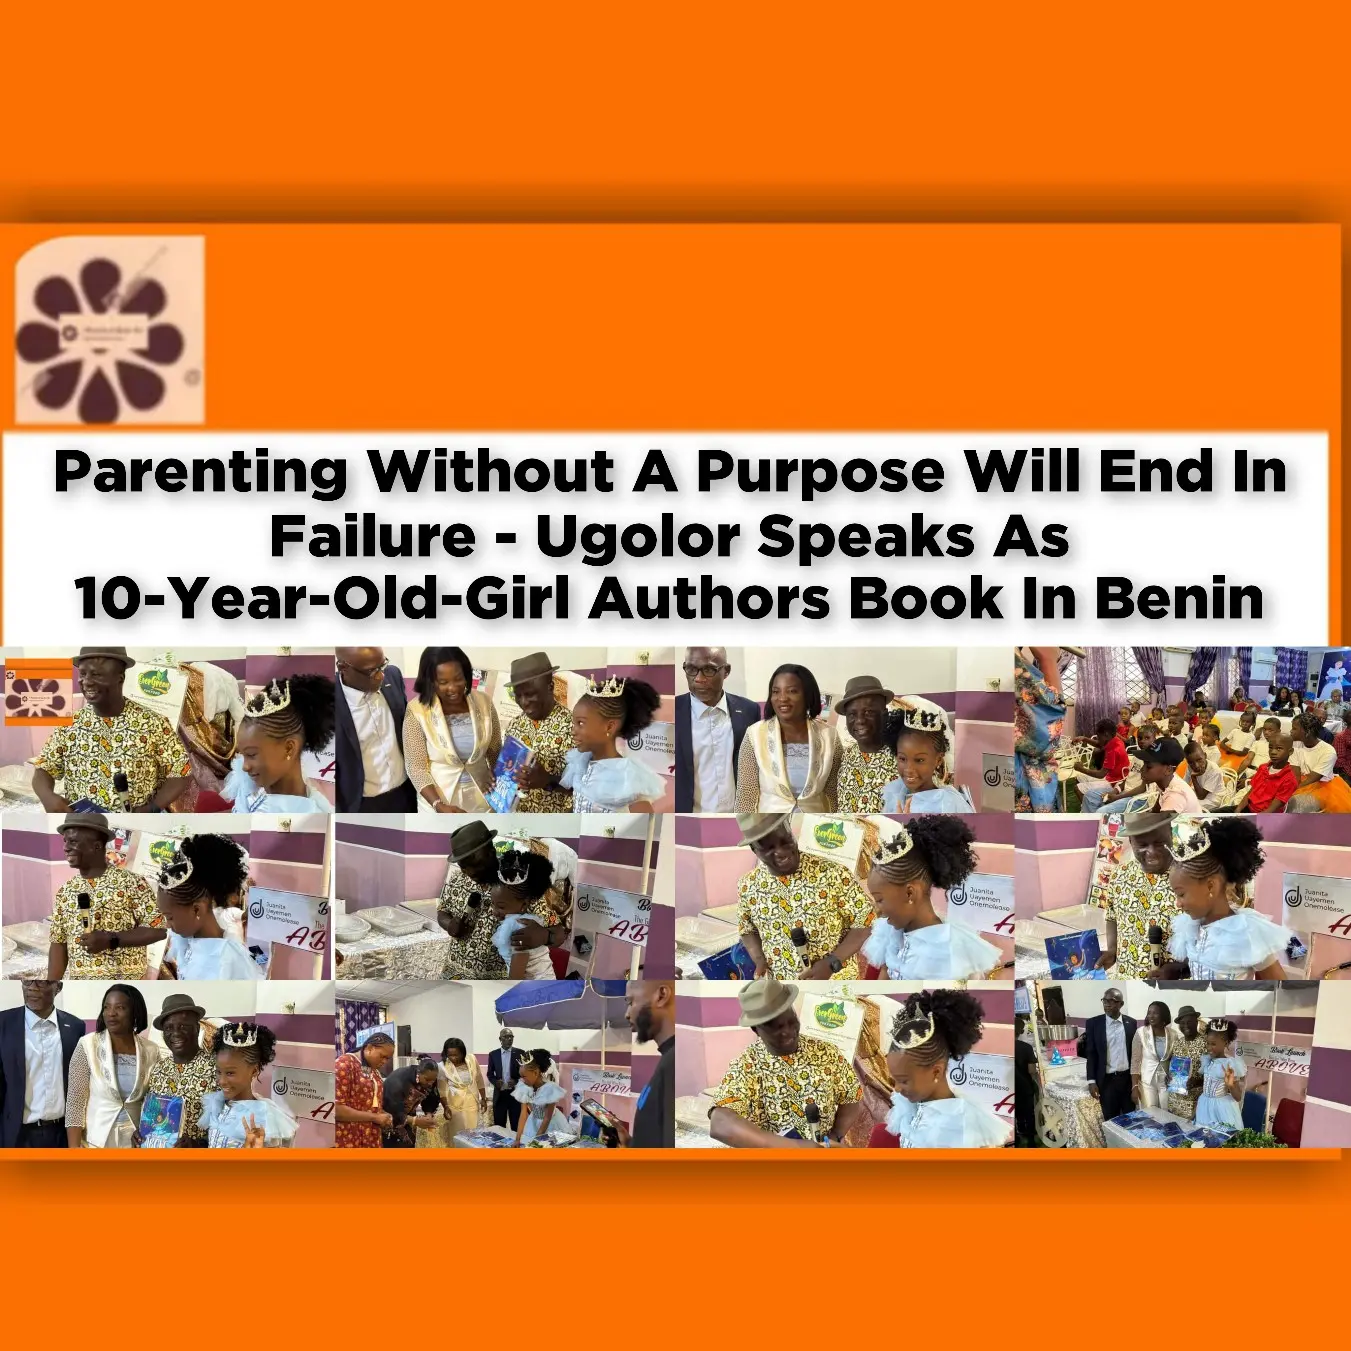 Parenting Without A Purpose Will End In Failure - Ugolor Speaks As 10-Year-Old-Girl Authors Book In Benin ~ OsazuwaAkonedo #Northeast